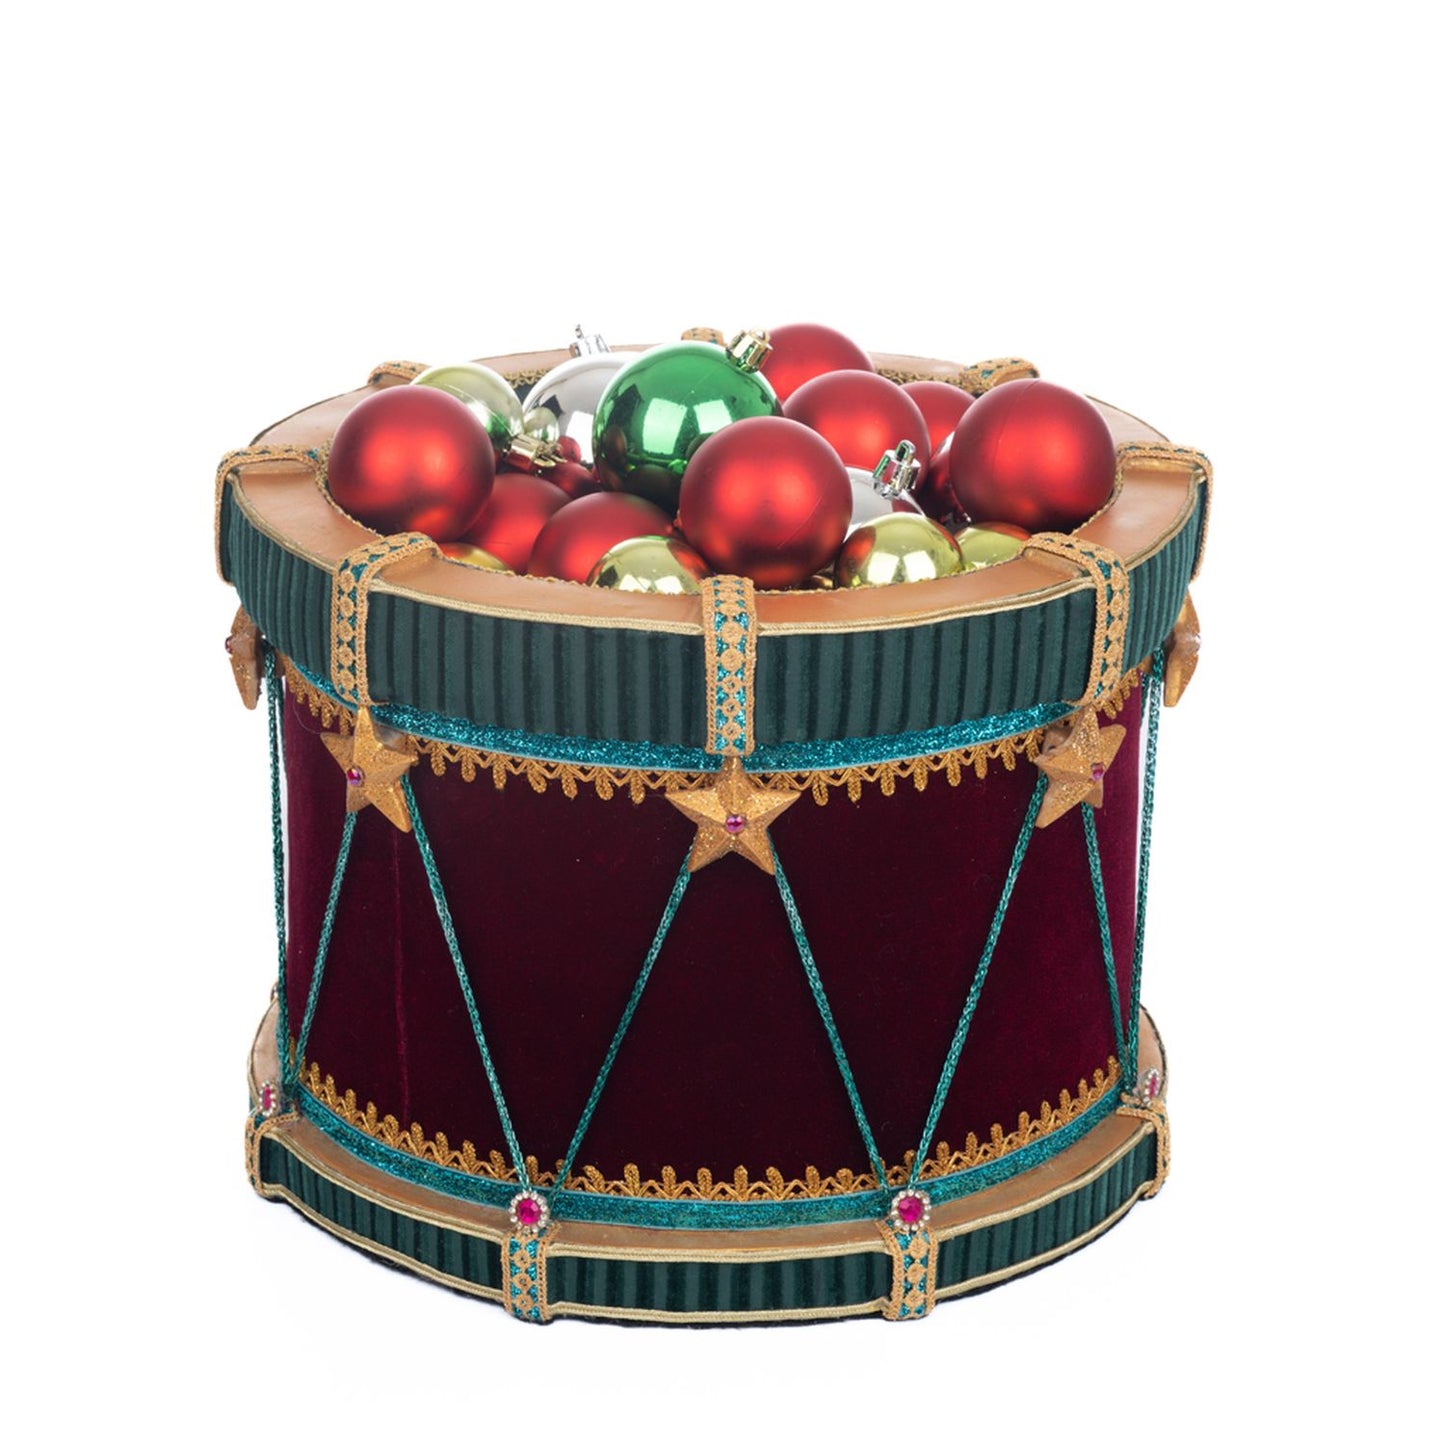 Katherine's Collection Nutcracker Drum Candy Container, 12x9 Inches, Red/Green Resin